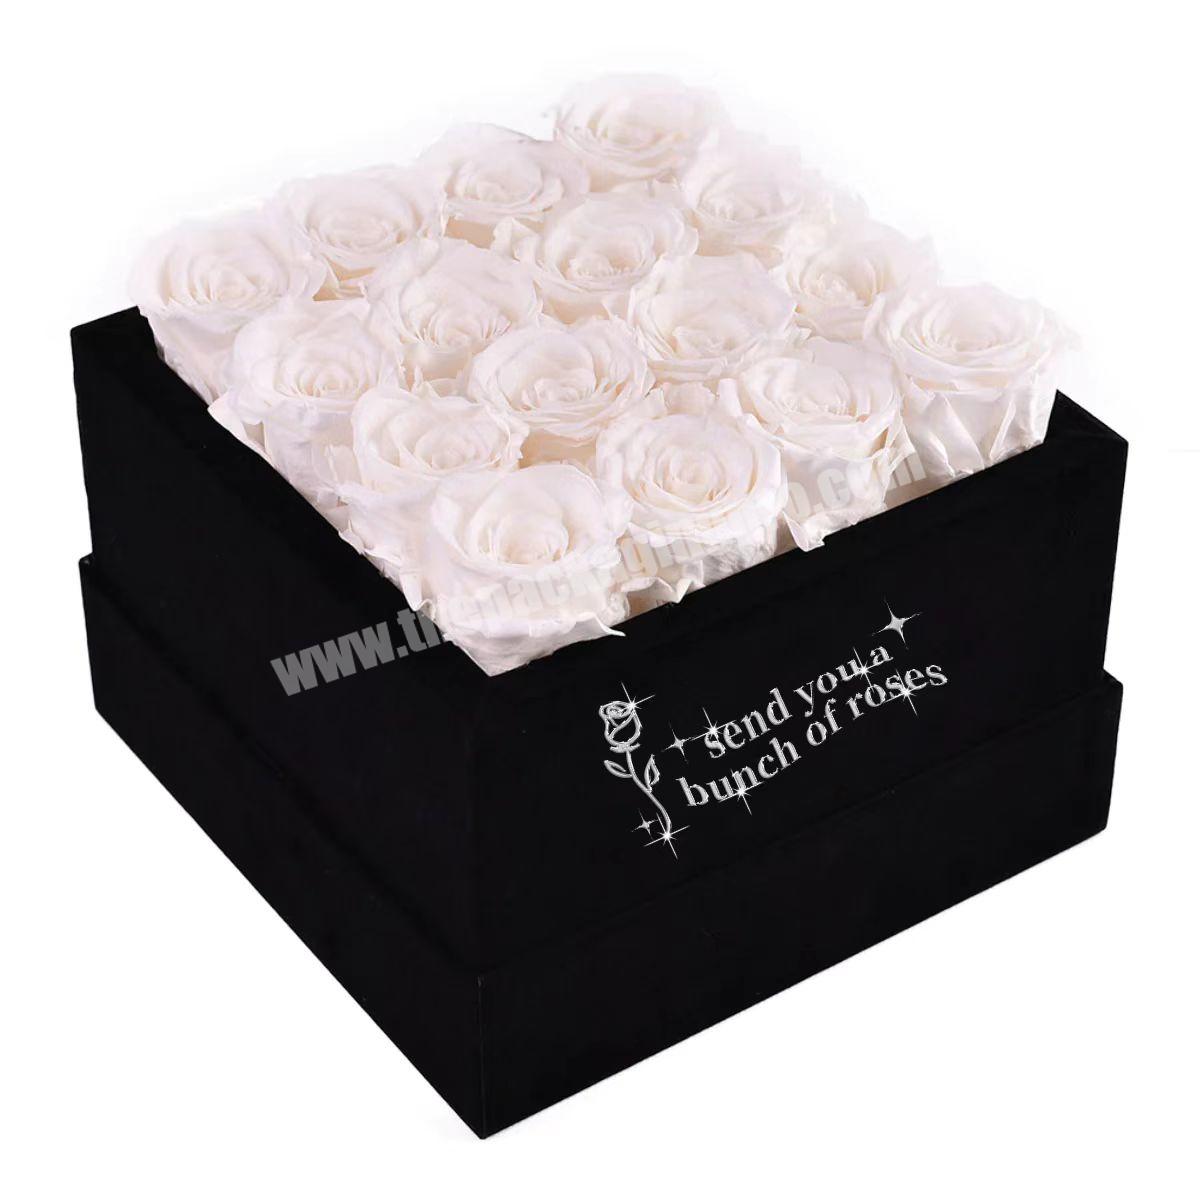 Wholesale flower gift box square preserved rose flower gift packaging box for valentine's day mother's day